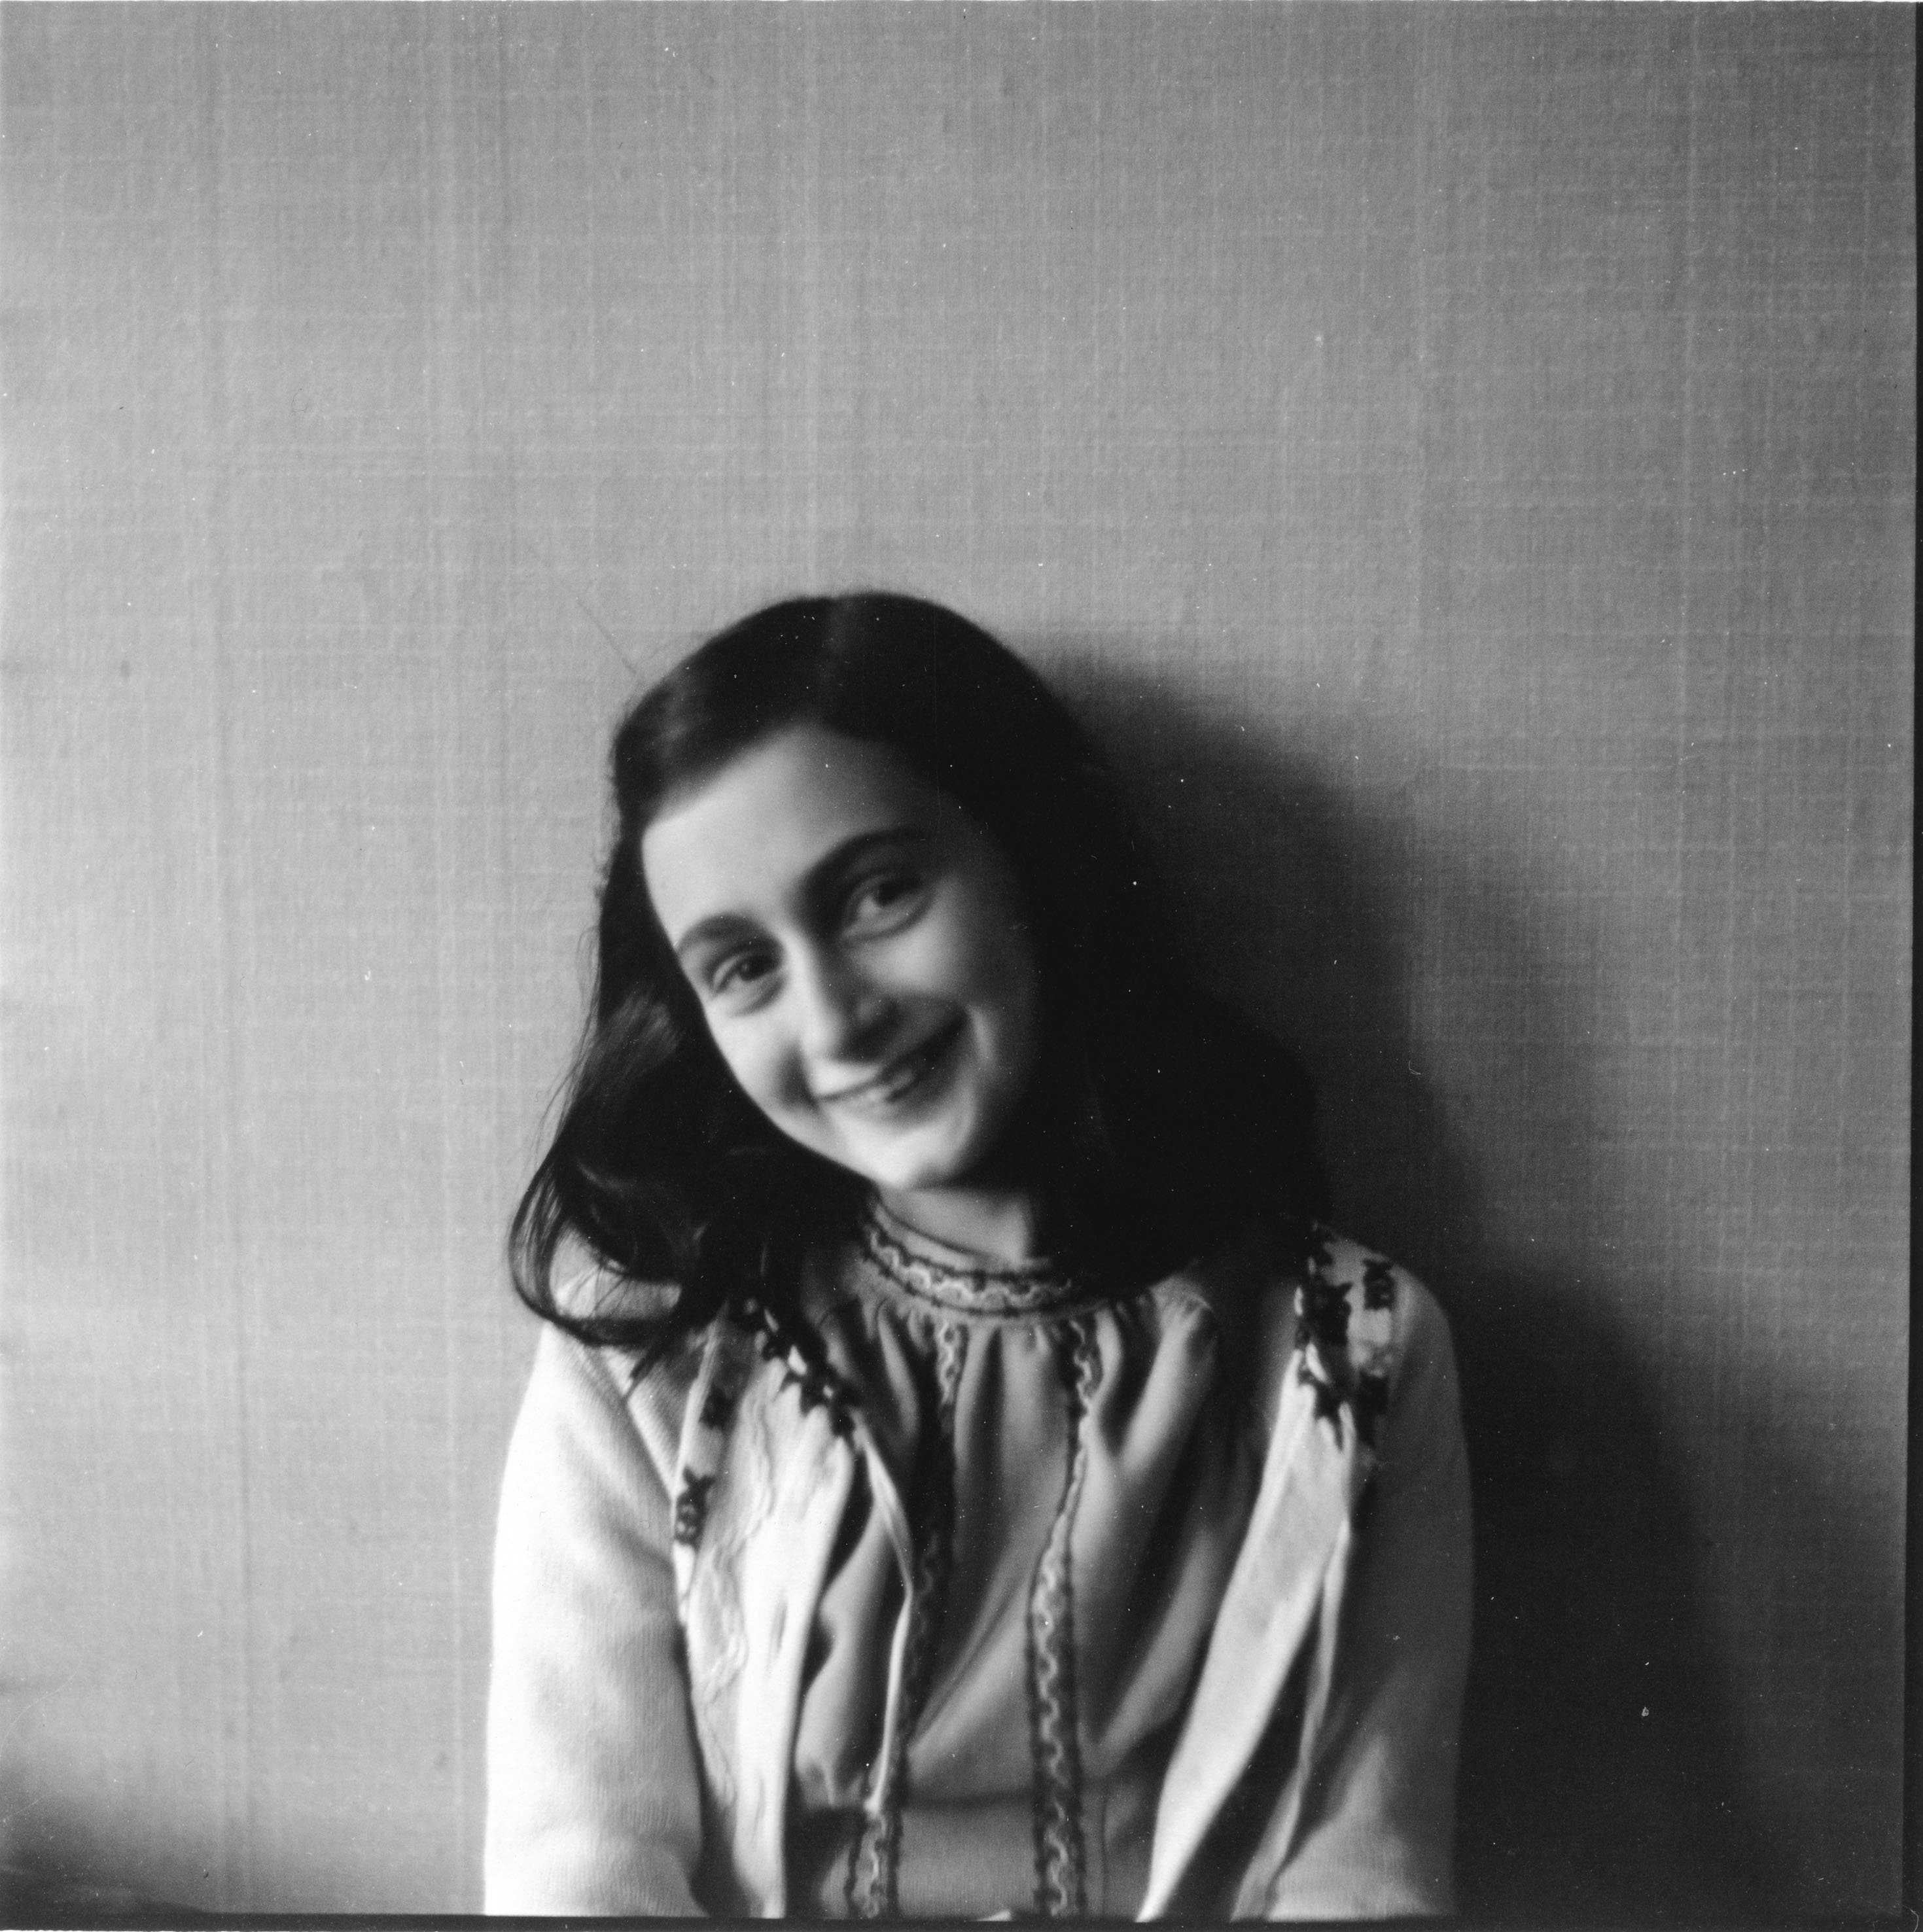 Anne Frank and her family were discovered in August 1944, when Dutch detectives and the SS raided the building they were hiding in